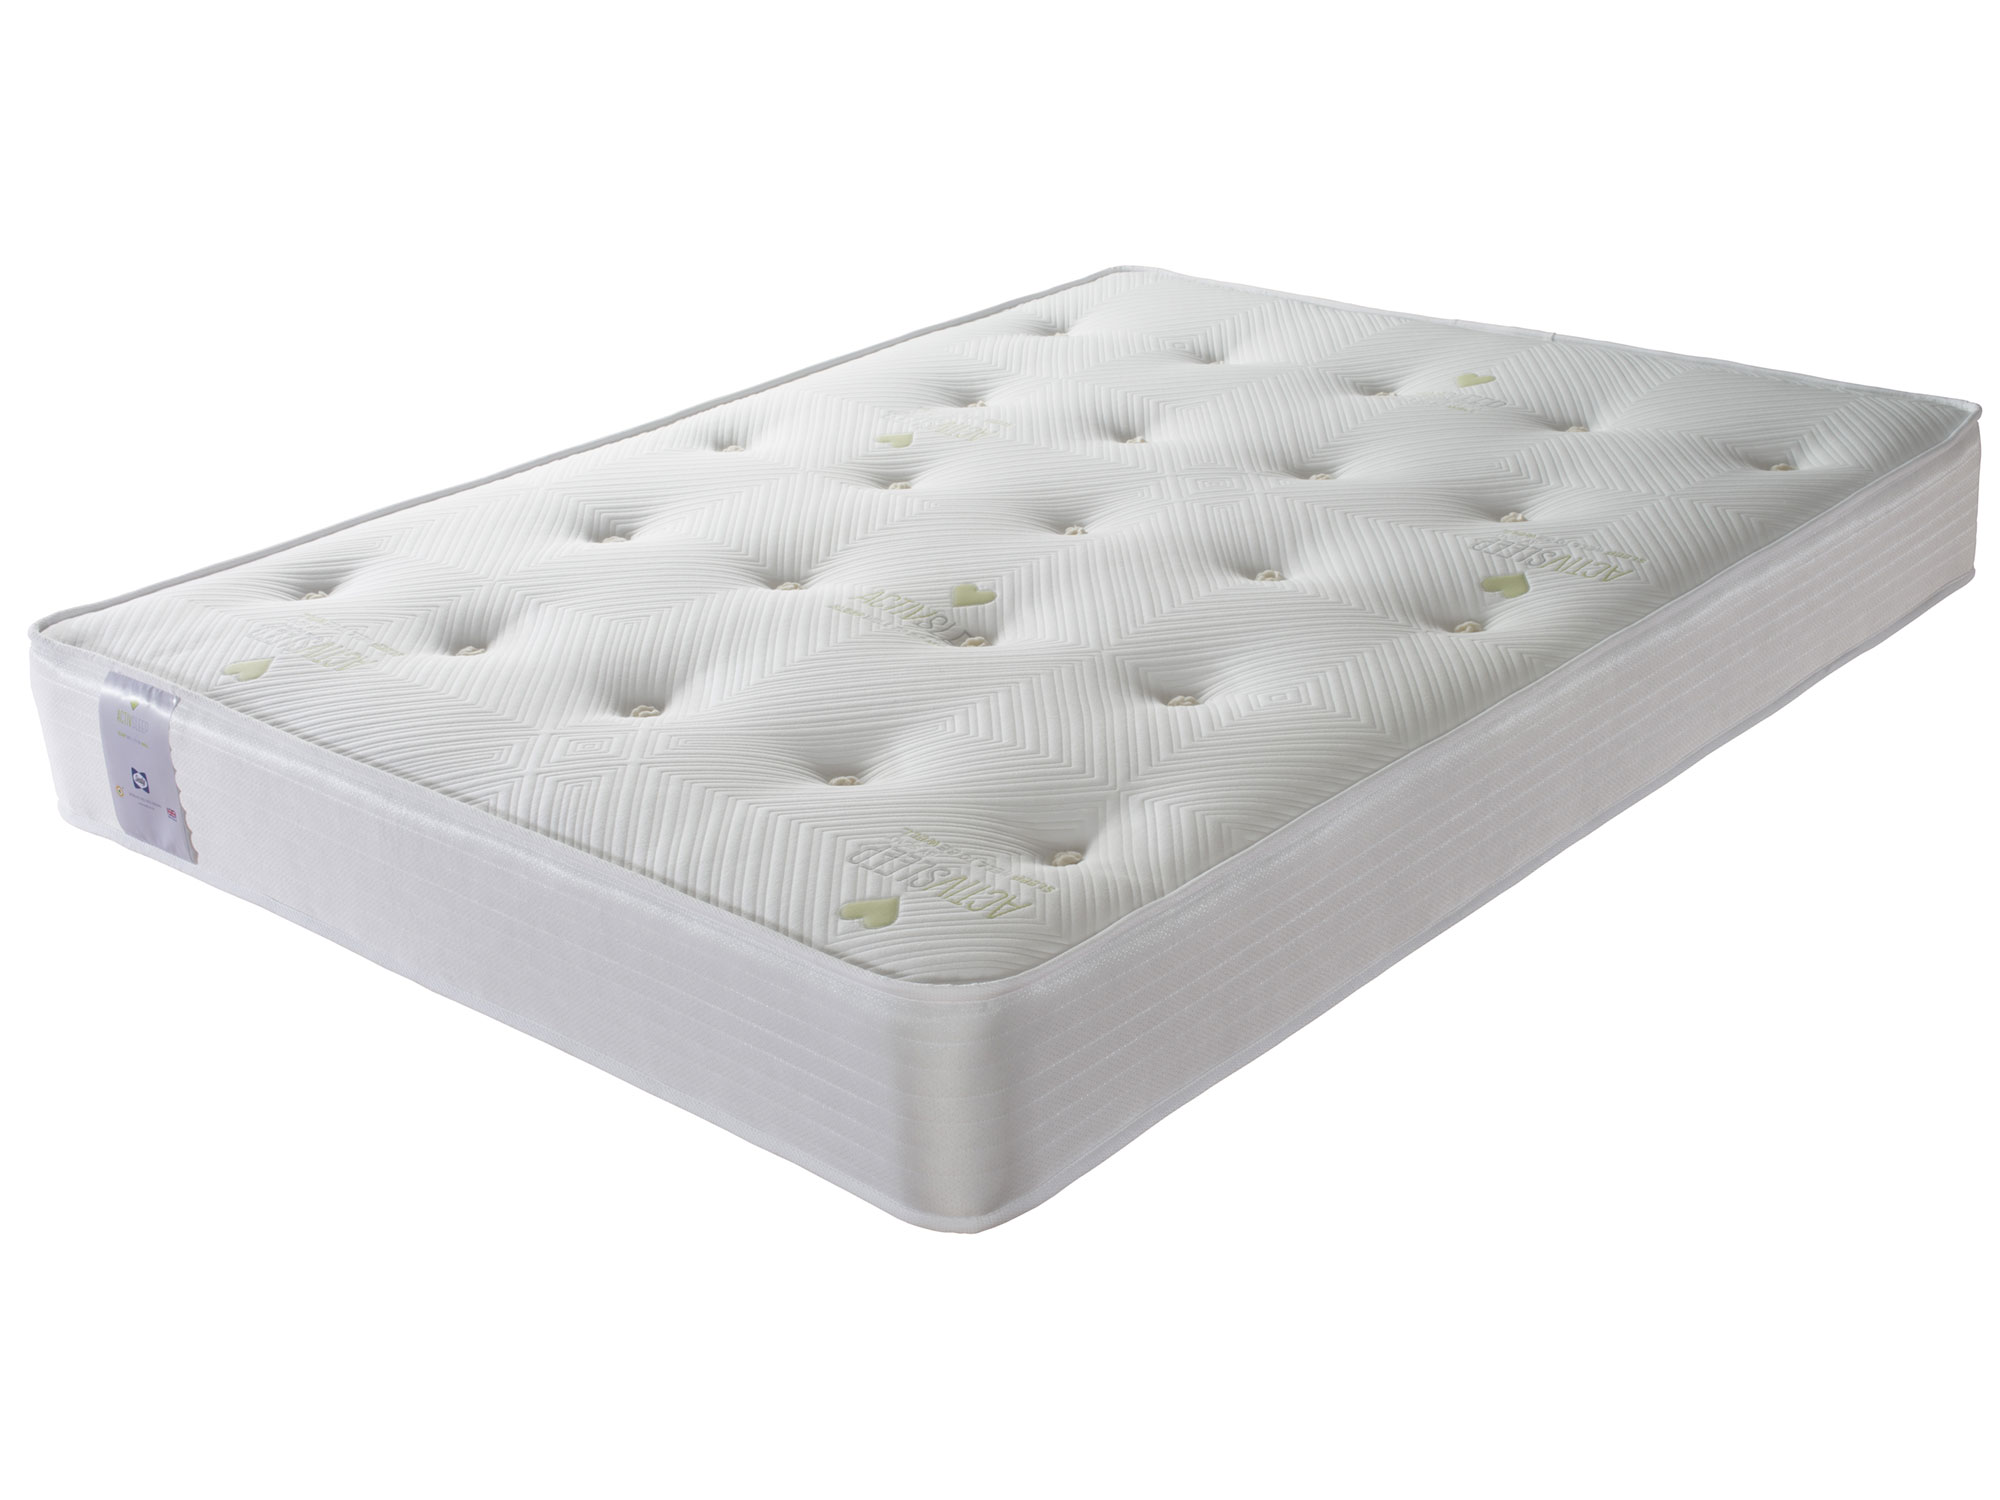 6ft Super King Size Sealy ActivSleep Ortho Extra Firm Mattress